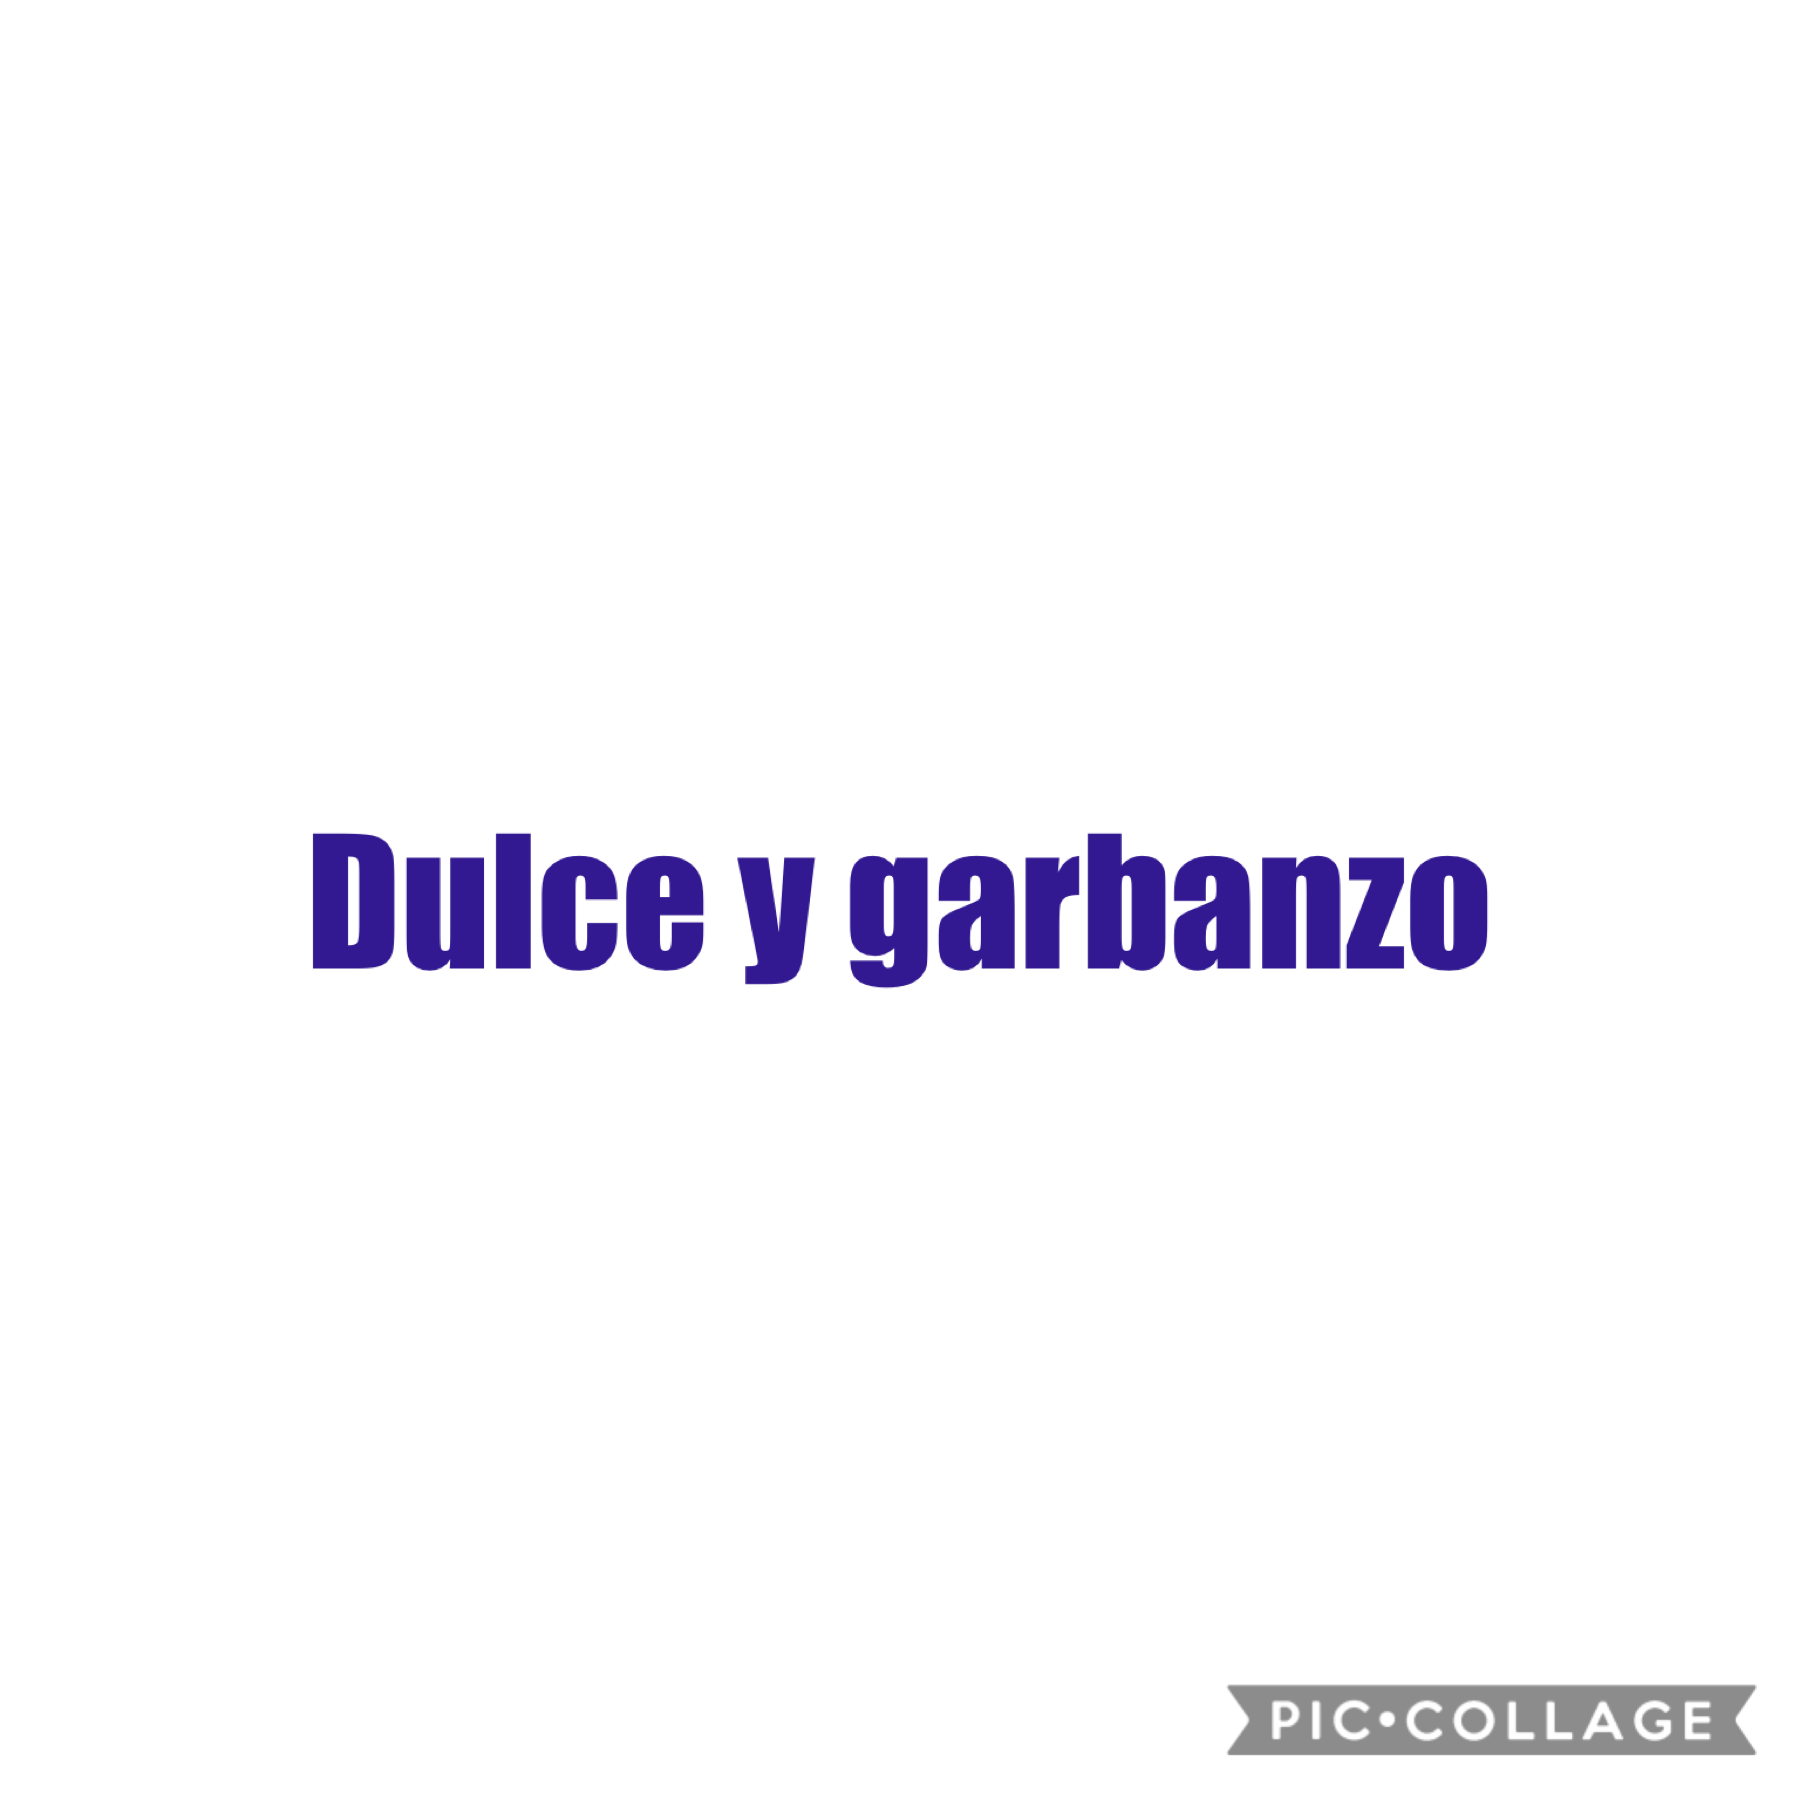 The new name of Dolce y Gabbana